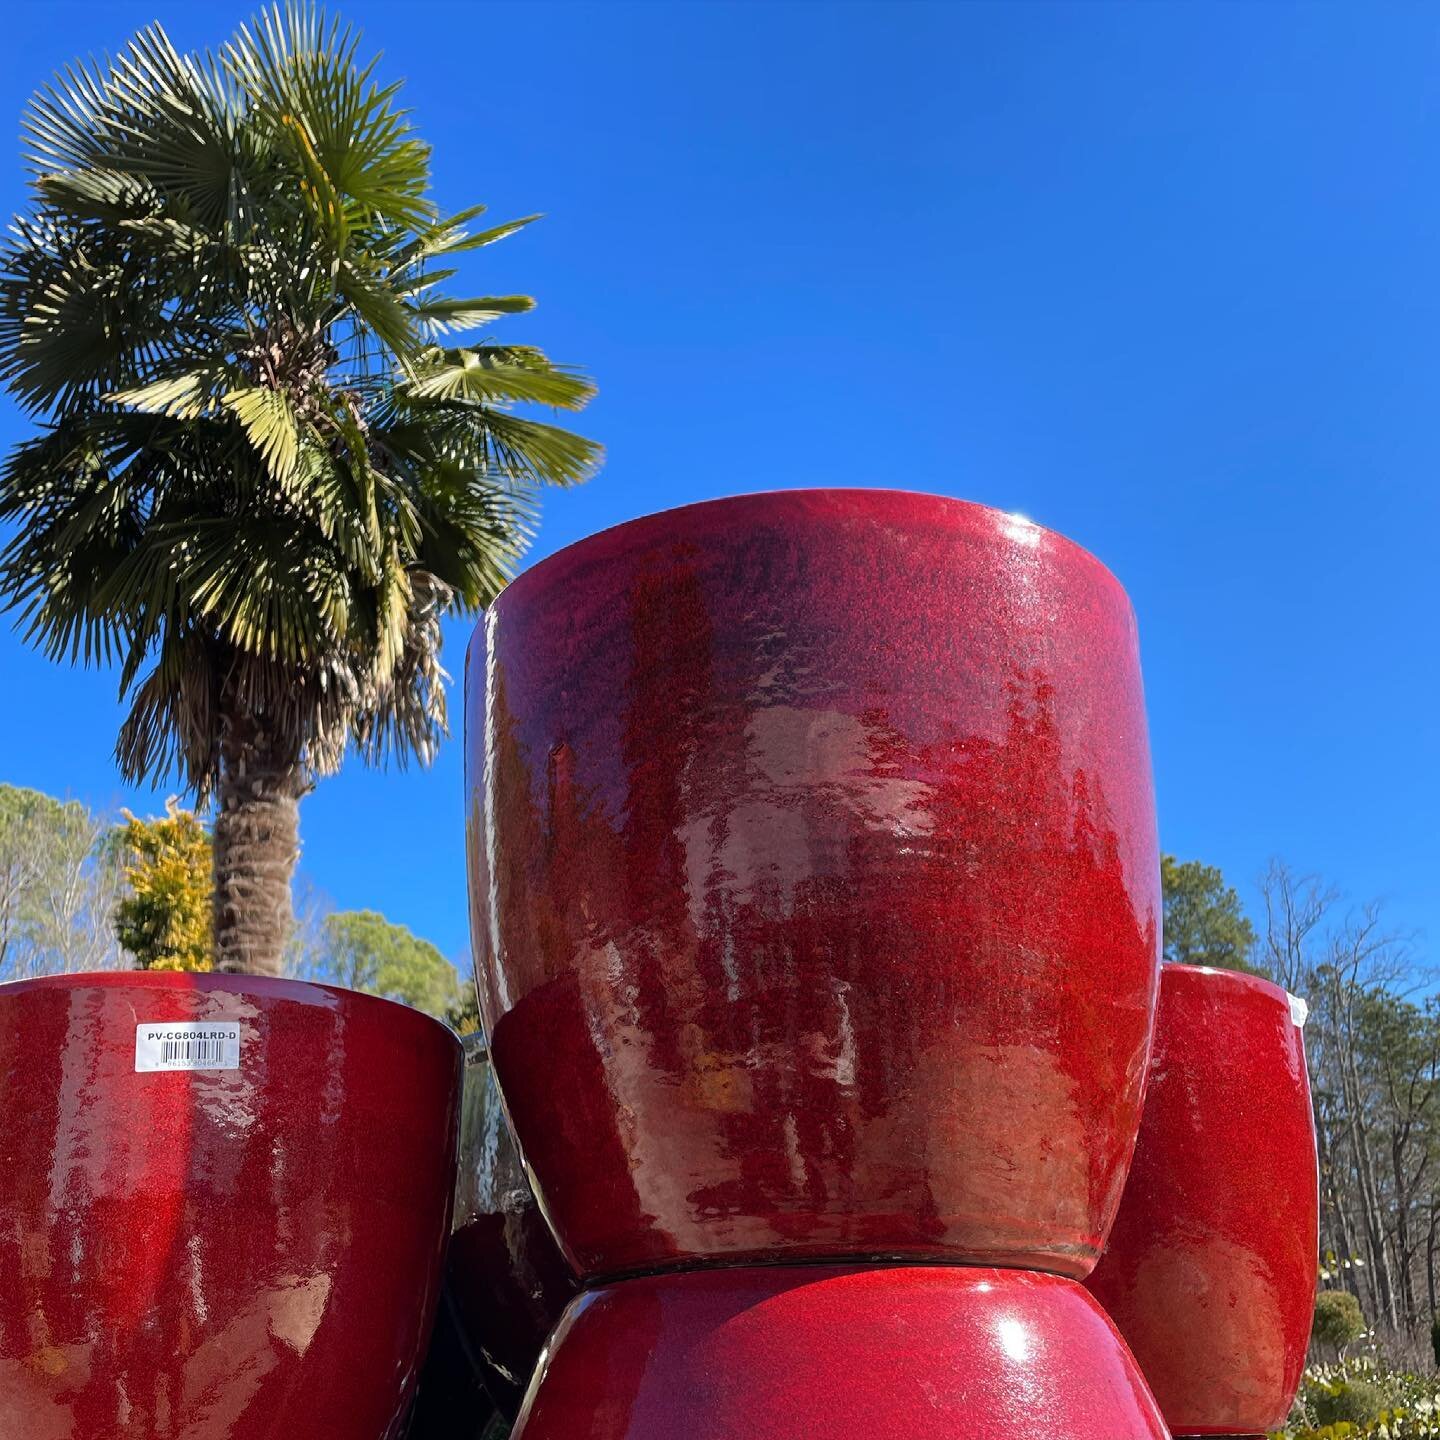 What would you plant in these fierce red planters? 🔥🚒🌴 Pick out your favorites from our HUGE assortment! Garden and greenhouse OPEN regular hours today, Sun 11am-5pm, M-F 9am-6pm, Sat 8am-6pm &bull;
&bull;
&bull;
&bull; 
#cary #apex #raleigh #durh